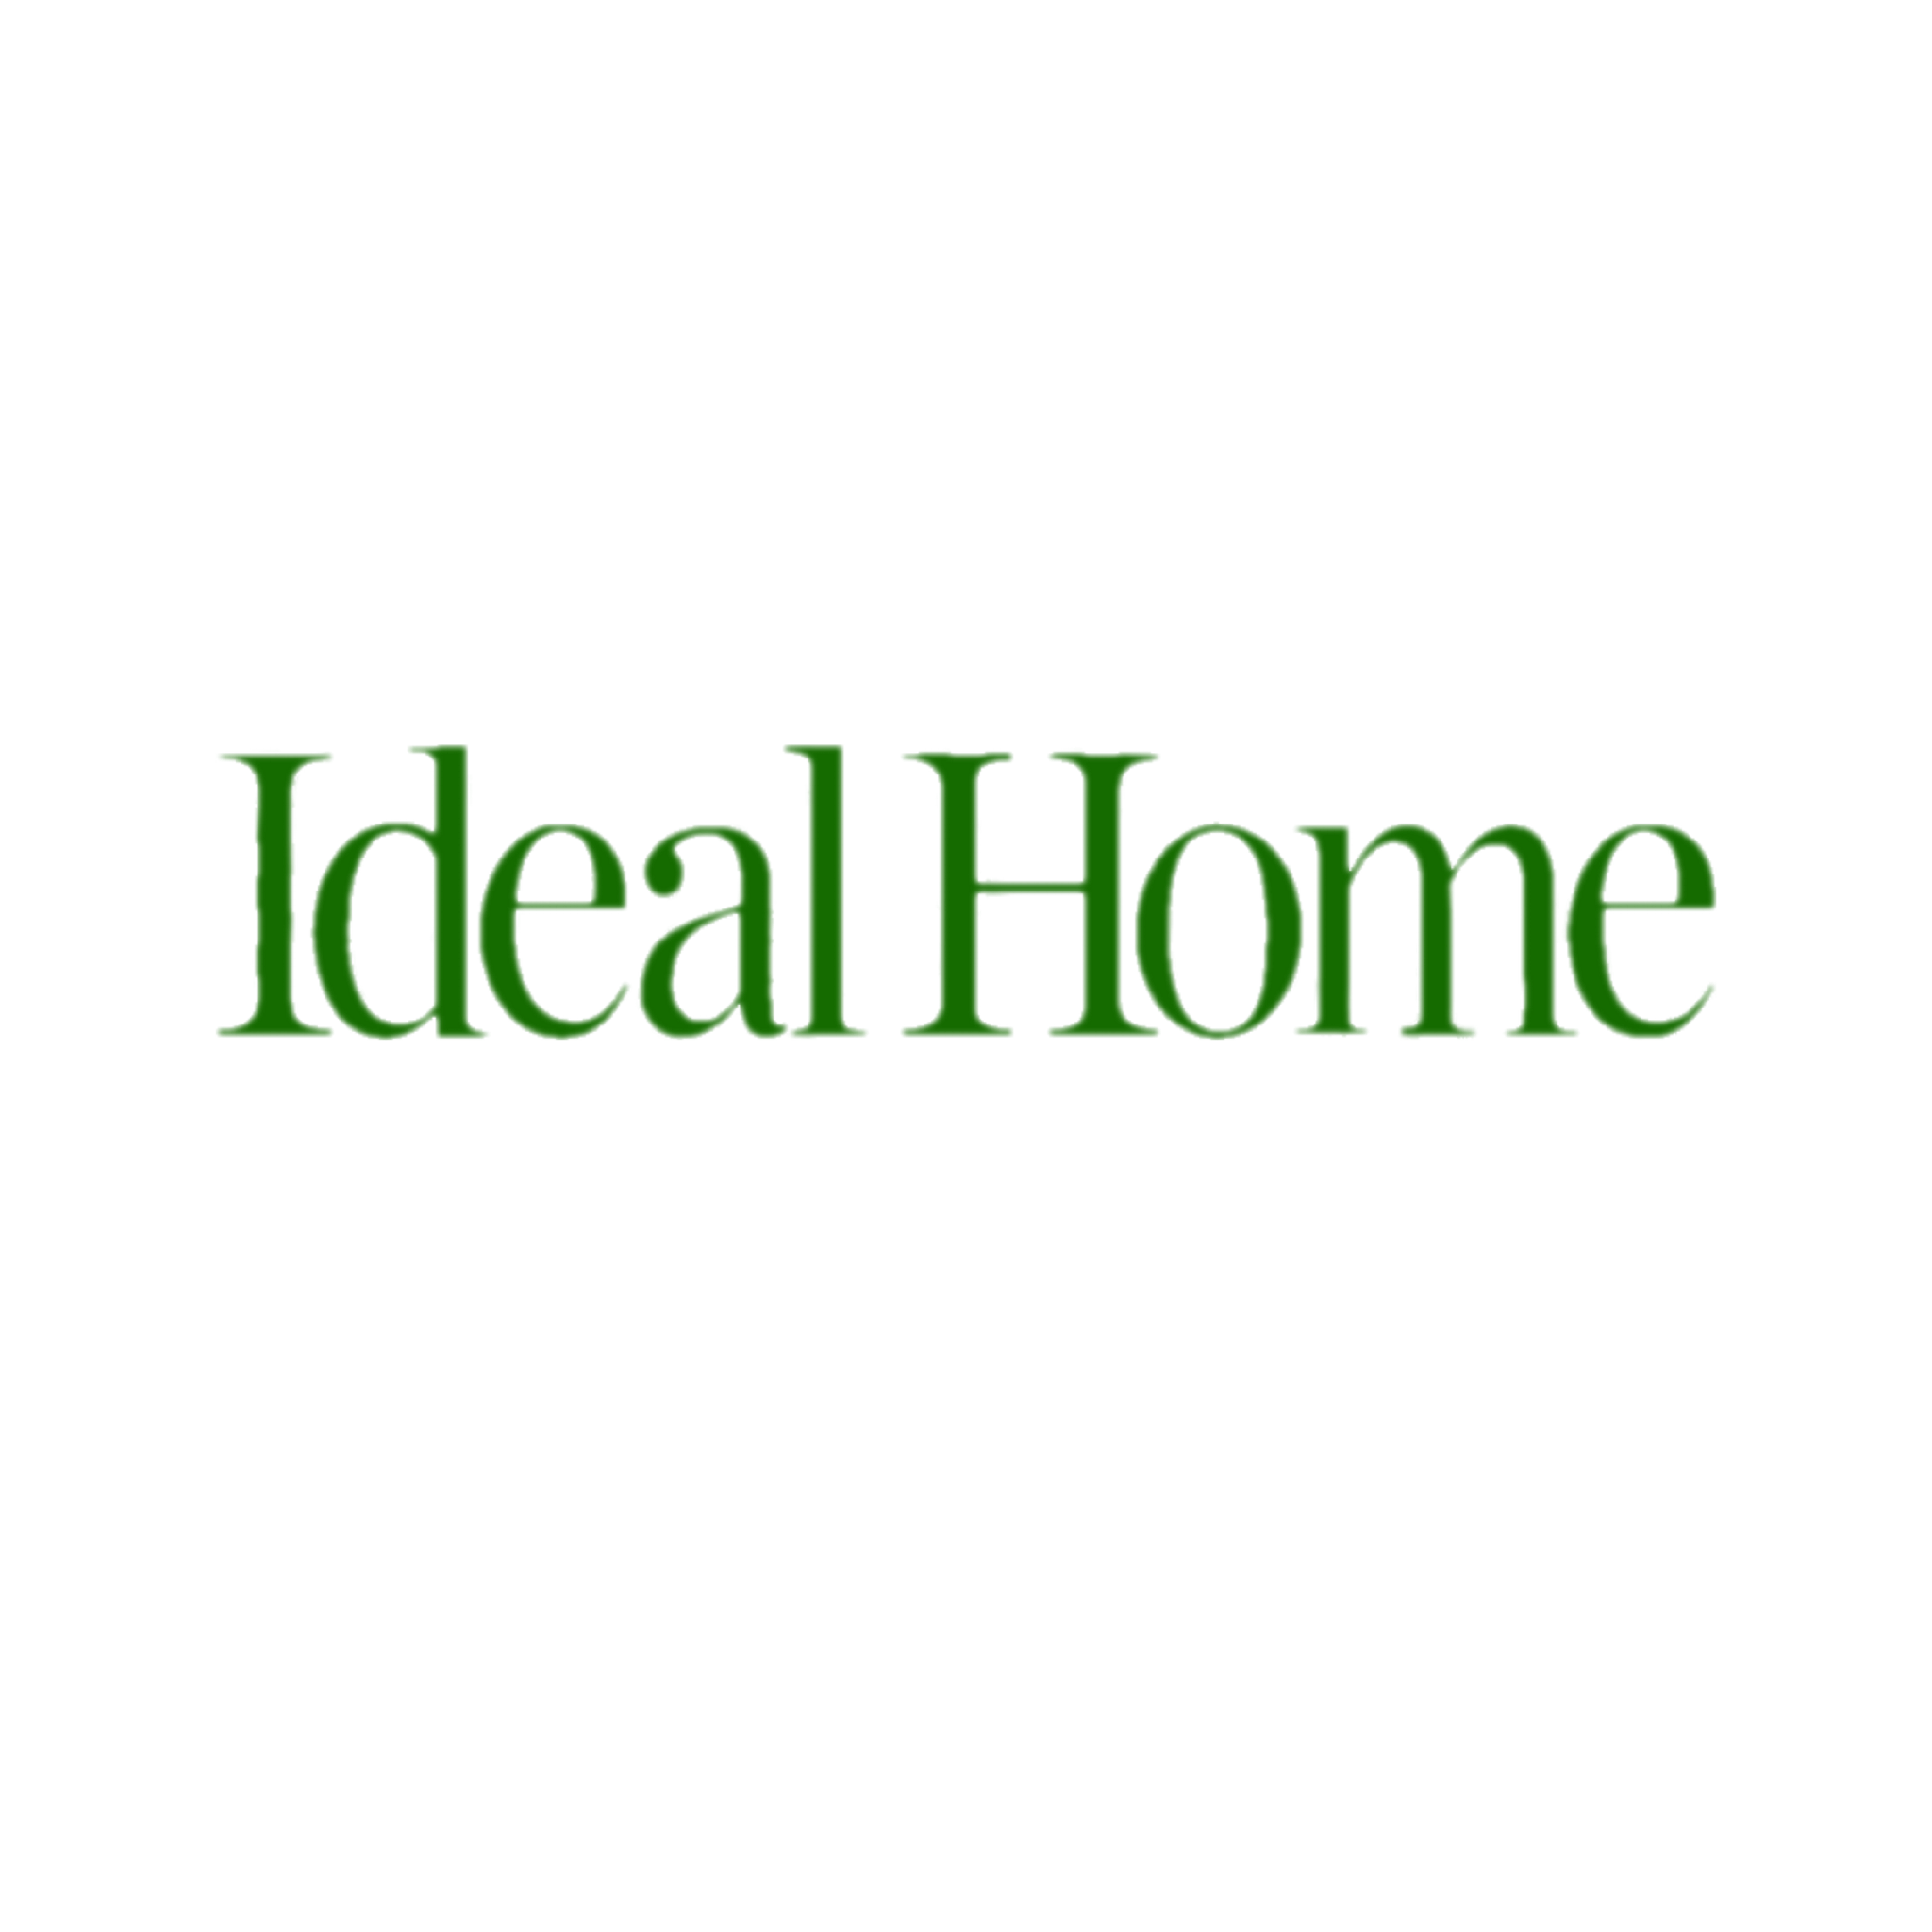 Featured In Ideal Home